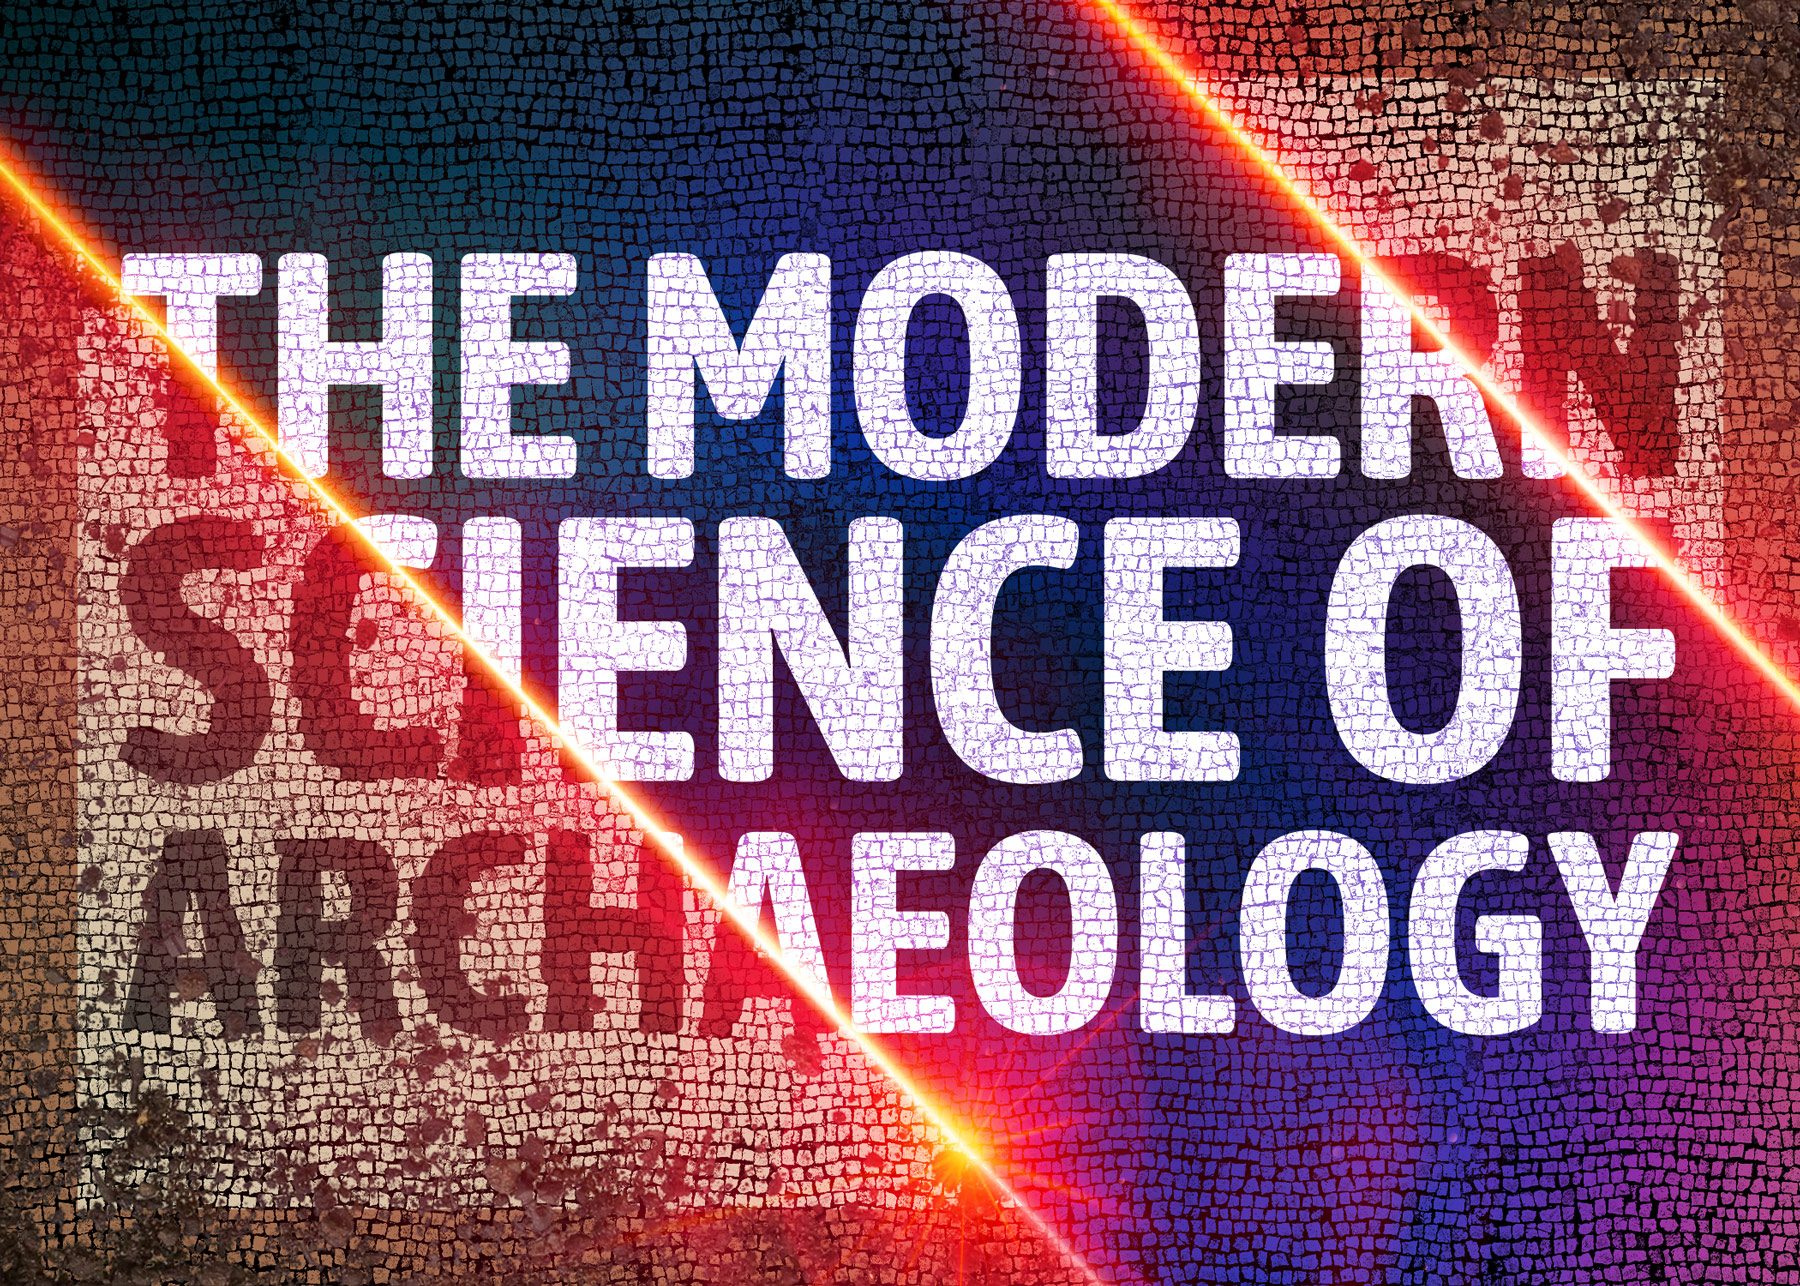 A mosaic-like graphic reading “The Modern Science of Archaeology” with the lines of two red lasers cutting across part of the type.